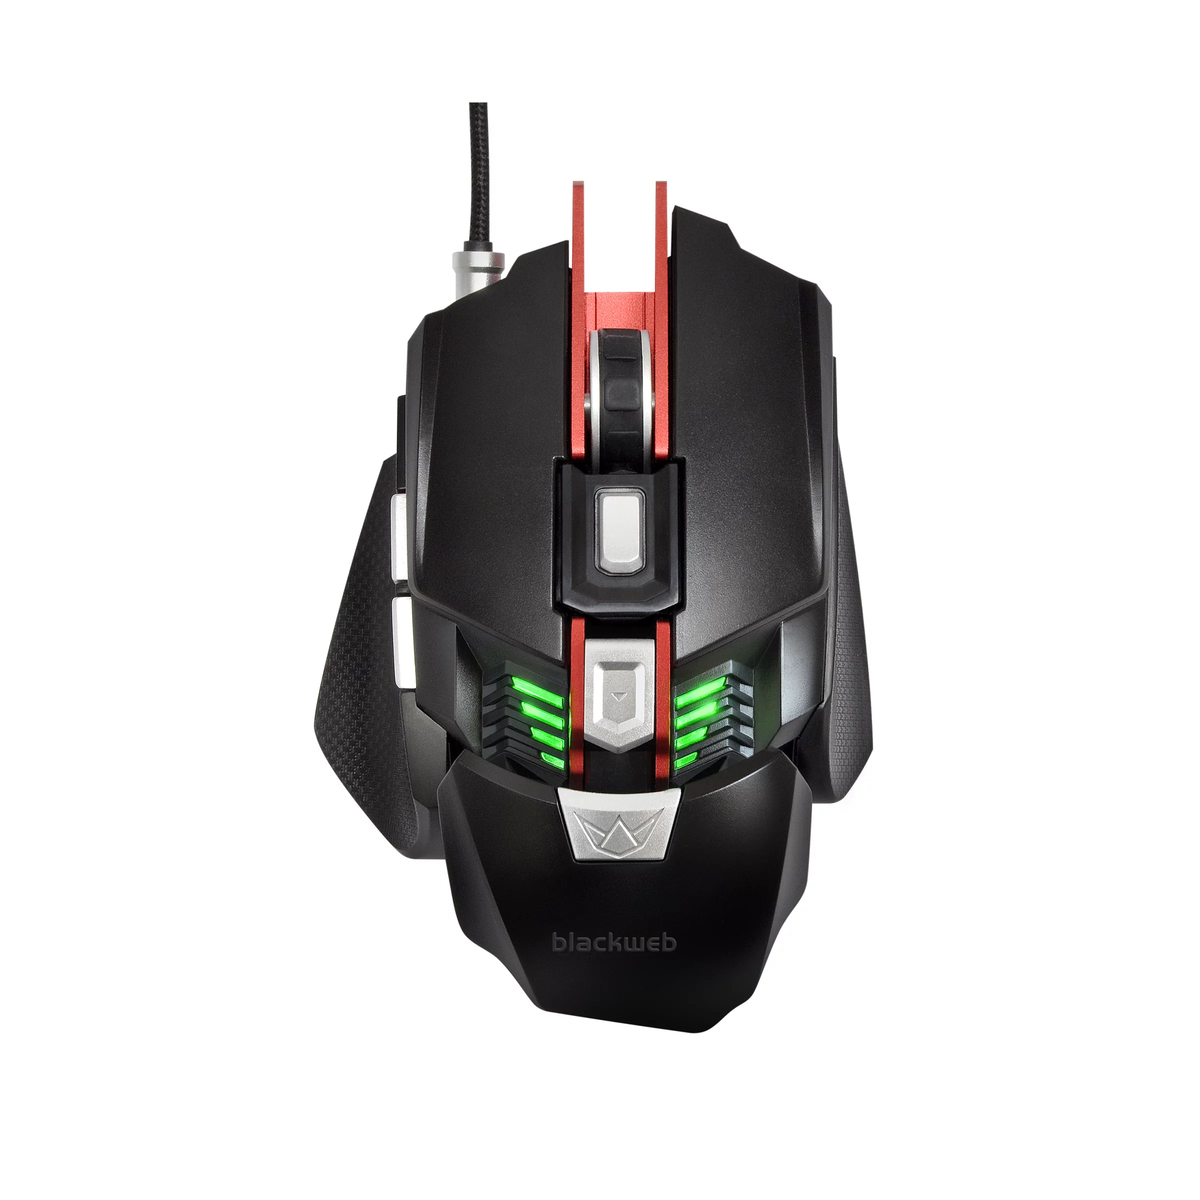 How To Get The Blackweb Gaming Mouse Software To Stop Starting Up On Windows Login?